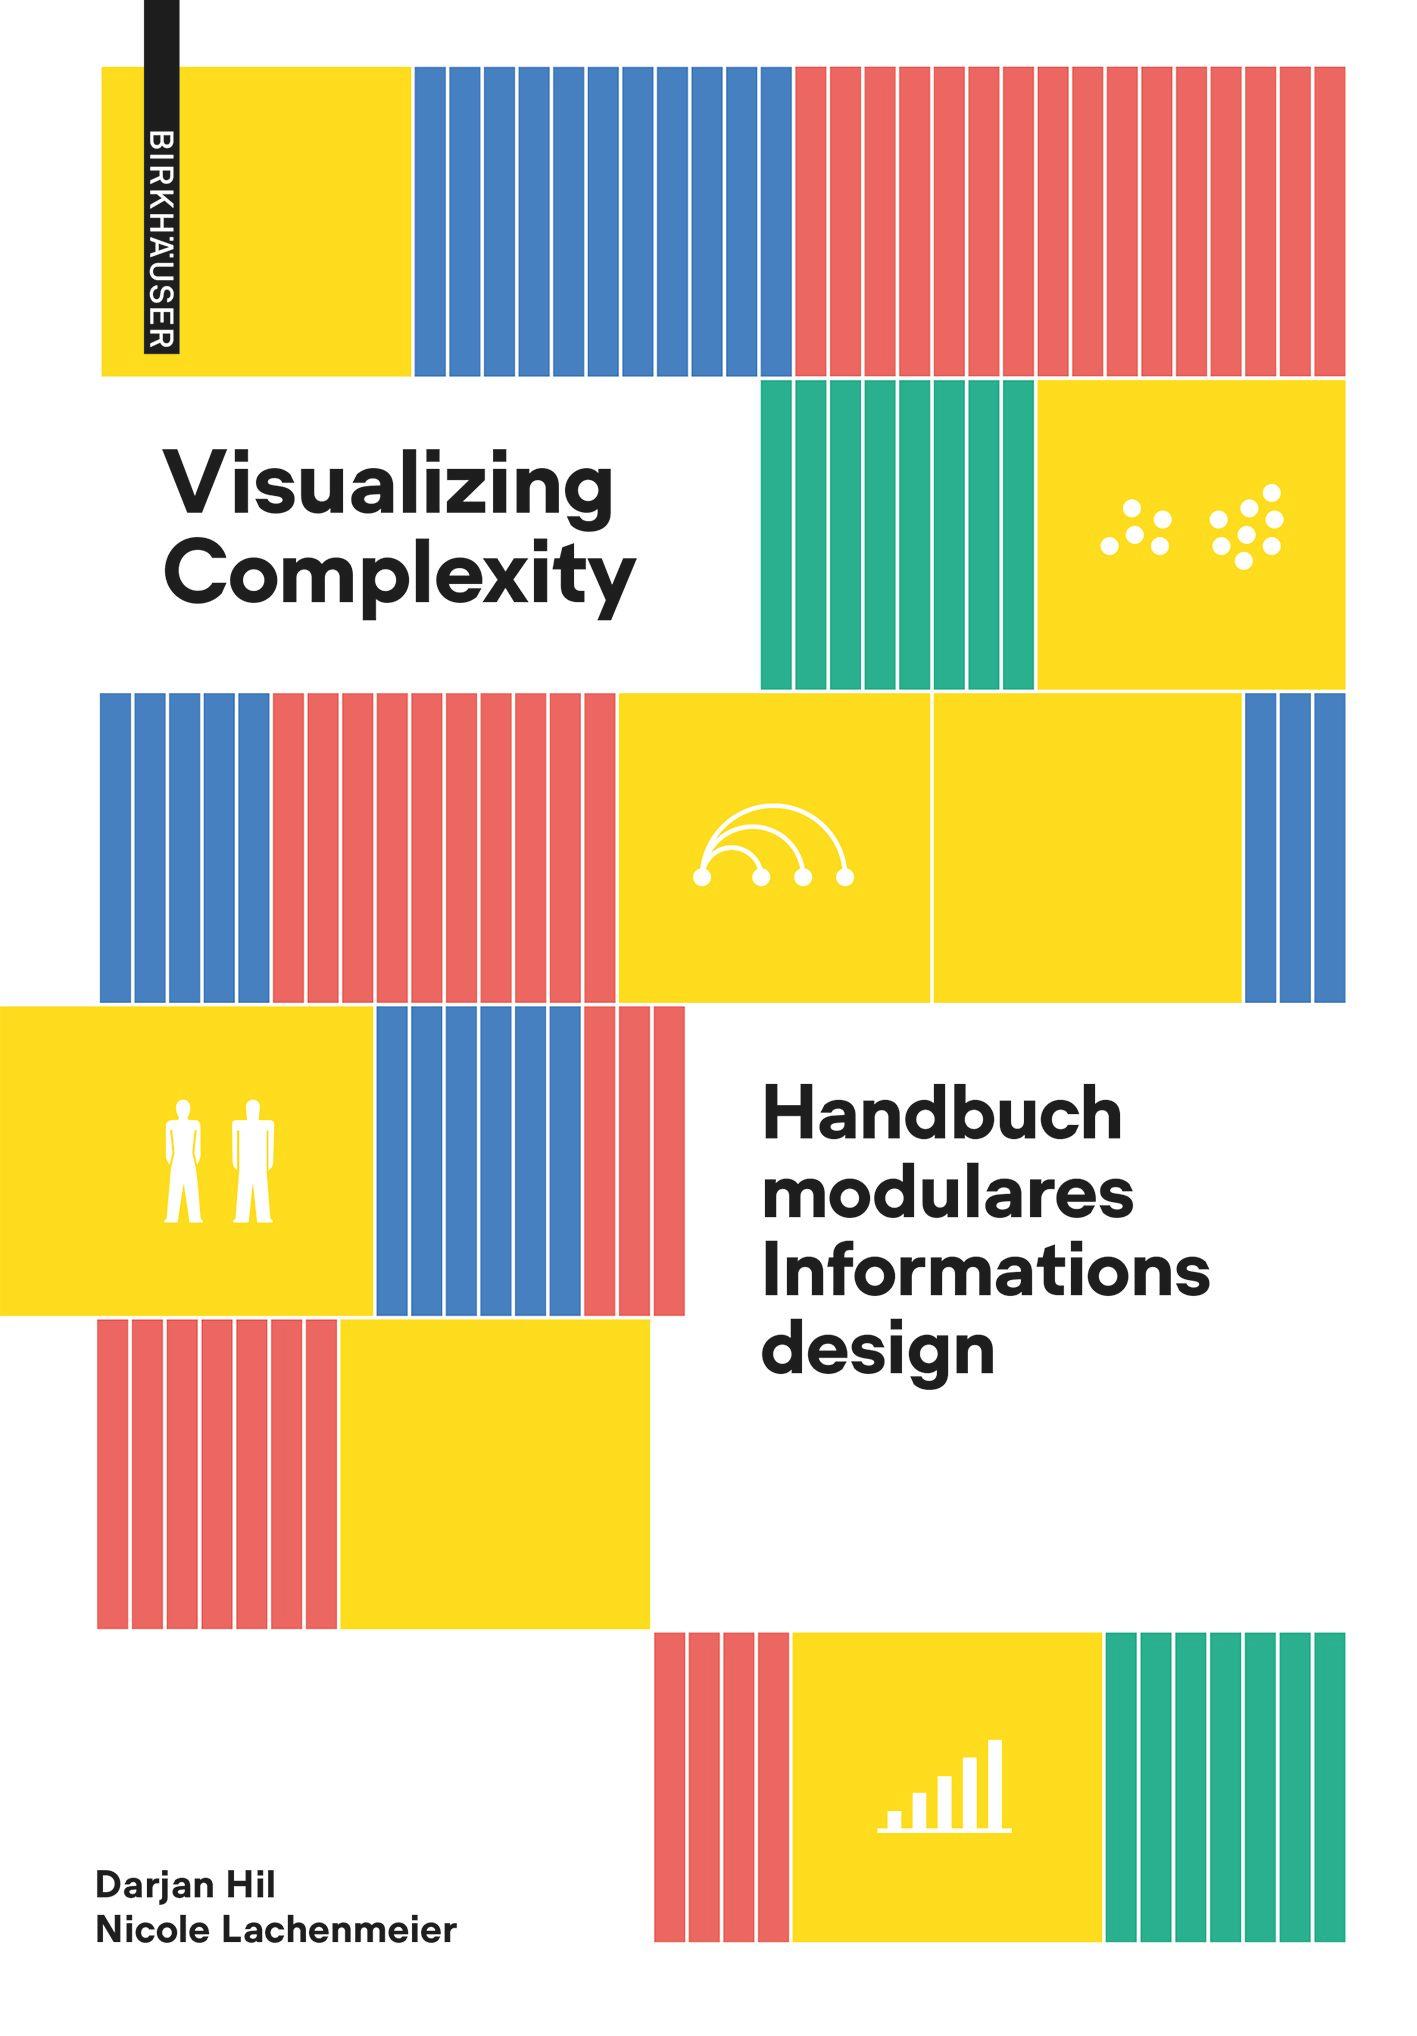 Visualizing Complexity's cover